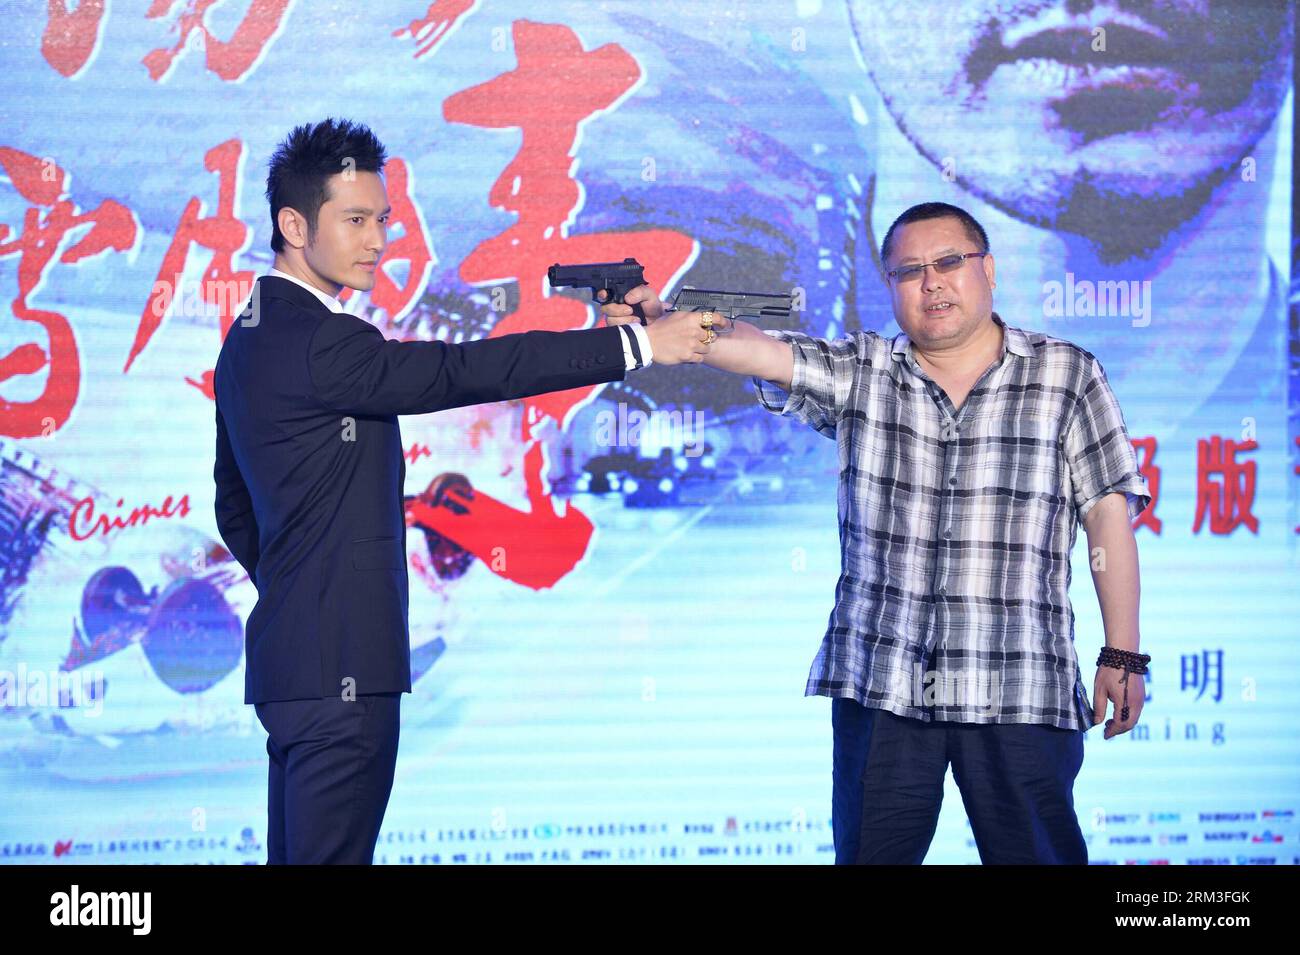 Bildnummer: 60171425  Datum: 22.07.2013  Copyright: imago/Xinhua BEIJING, July, 2013 - Actor Huang Xiaoming (L) and director Gao Qunshu pose for photos during the trailer release conference of the movie Crimes of Passion in Beijing, capital of China, July 22, 2013. The movie Crimes of Passion directed by Gao Qunshu will hit the screen on Aug. 9. (Xinhua/Zhao Dingzhe) (cjq) CHINA-BEIJING-MOVIE TRAILER RELEASE (CN) PUBLICATIONxNOTxINxCHN People Entertainment xns x0x 2013 quer     60171425 Date 22 07 2013 Copyright Imago XINHUA Beijing July 2013 Actor Huang Xiao Ming l and Director Gao Qunshu Pos Stock Photo